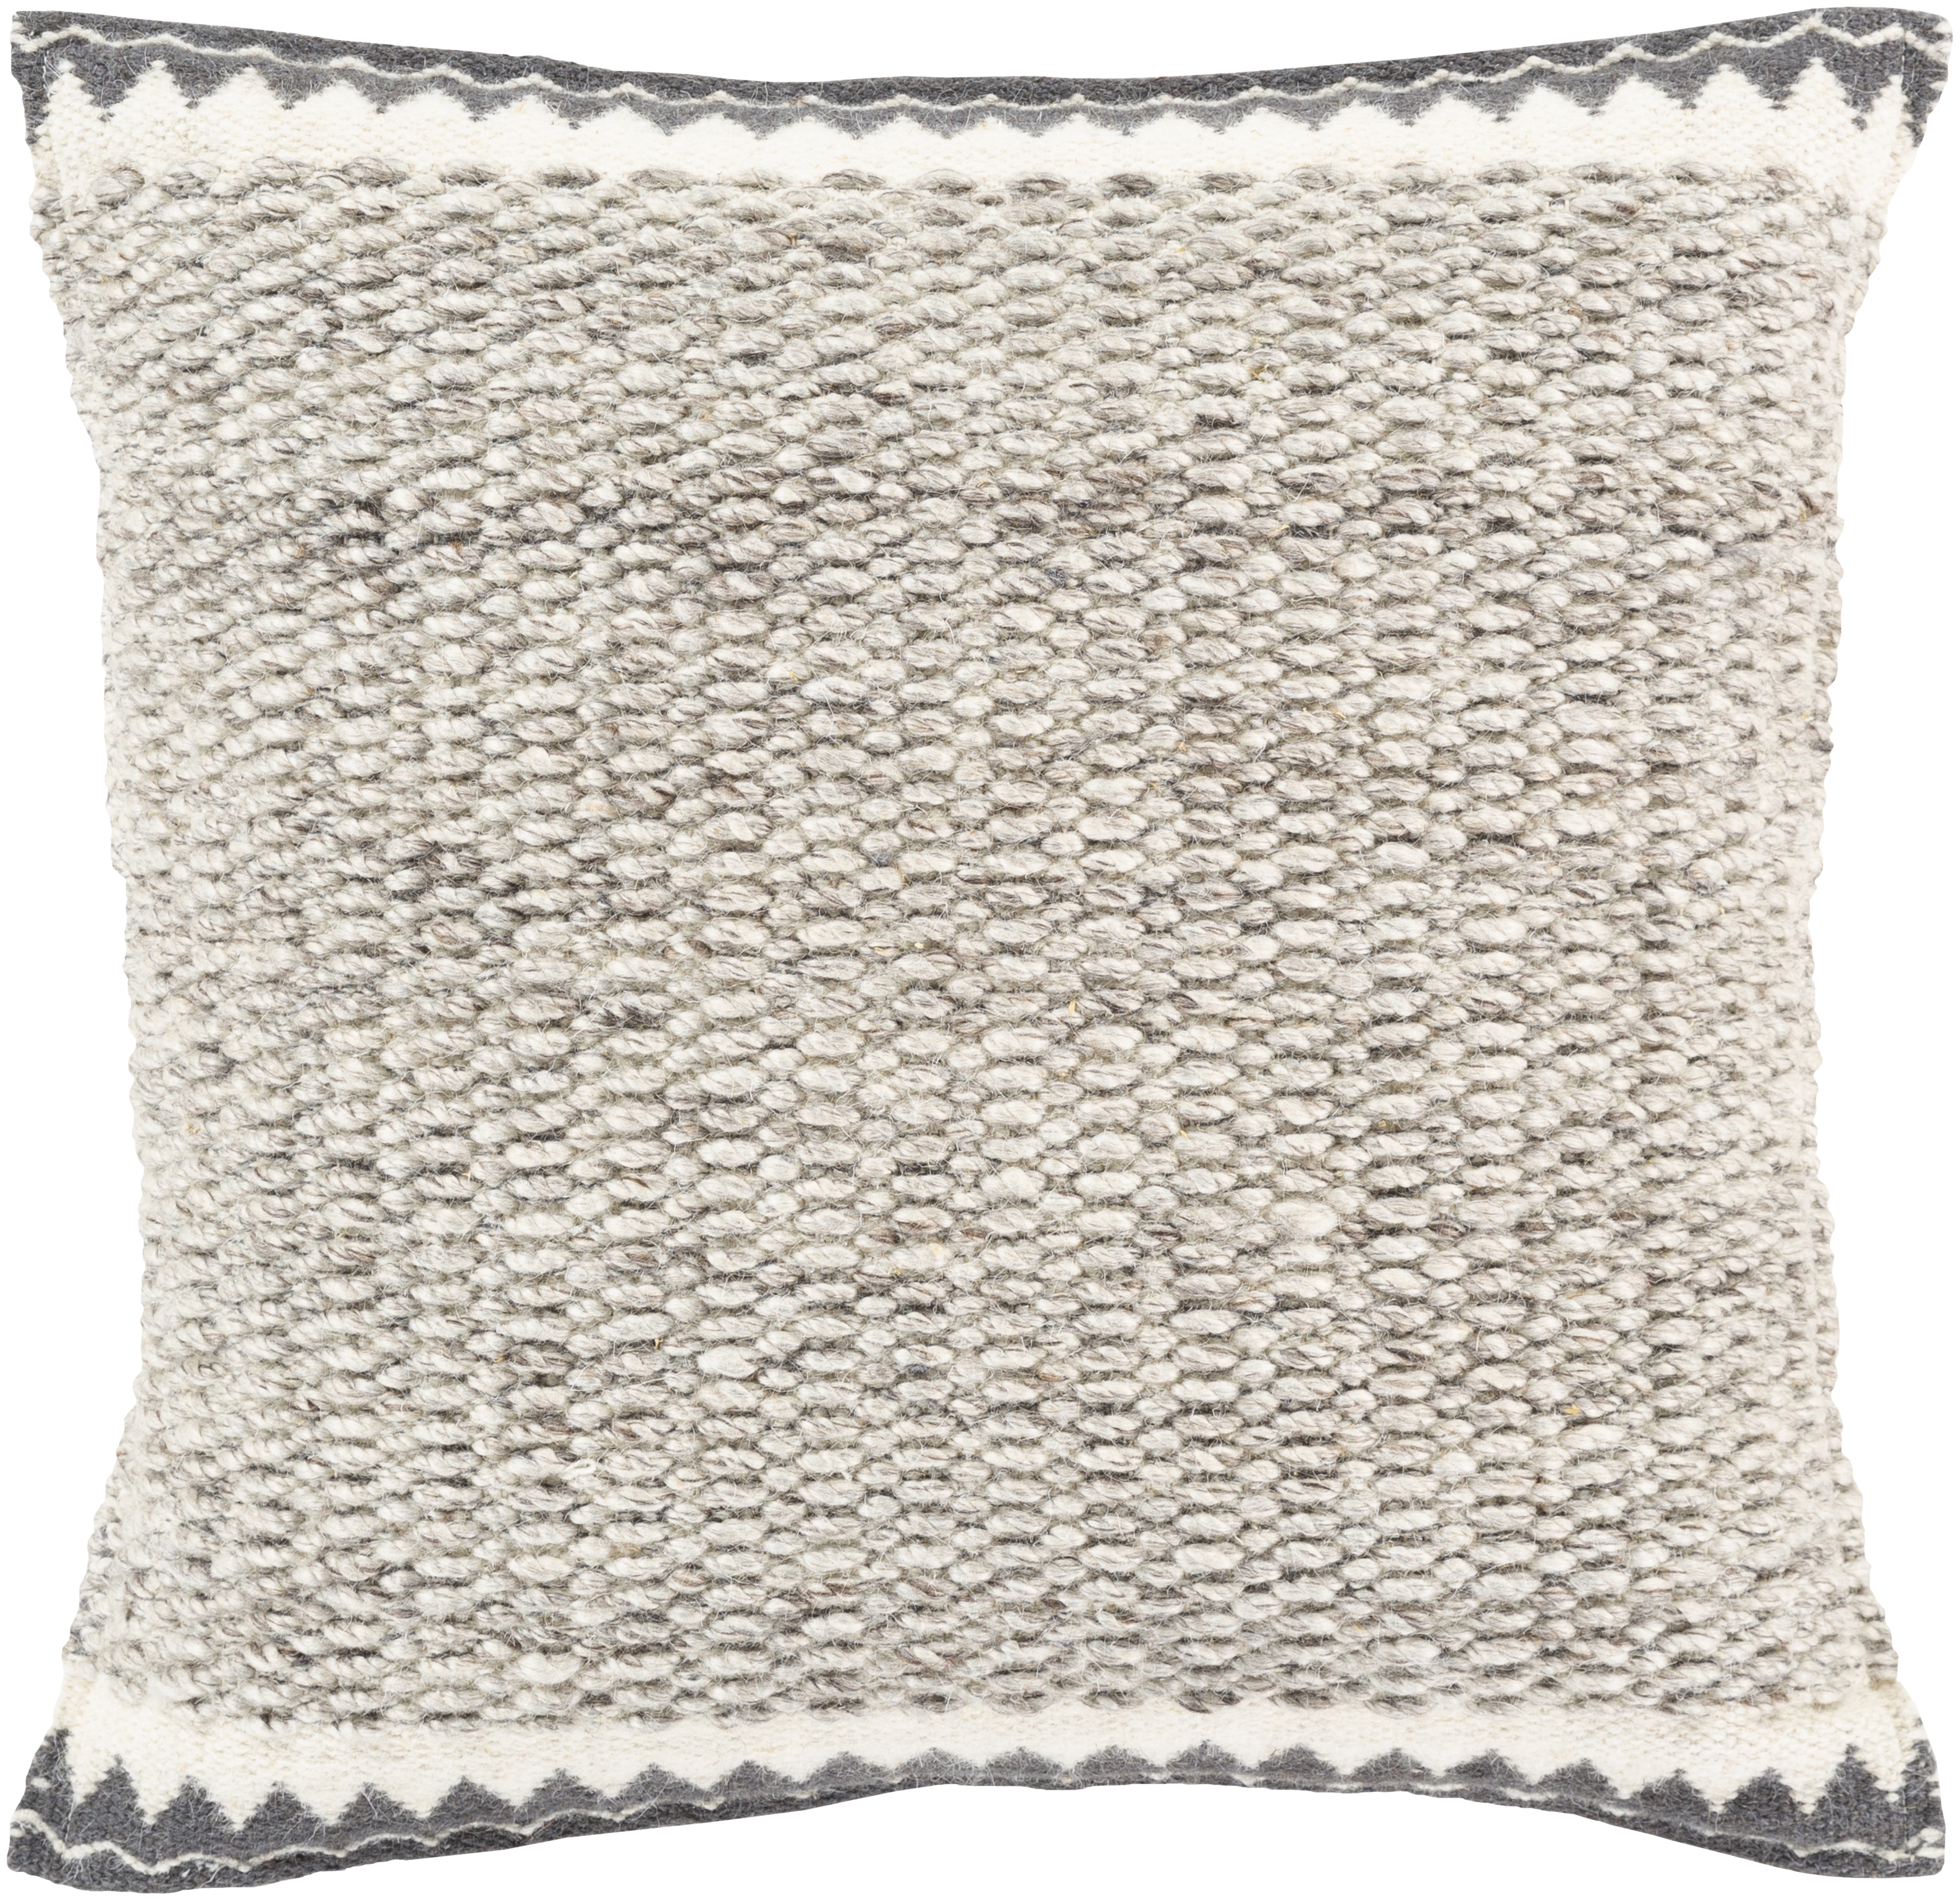 Faroe Throw Pillow, 22" x 22", with down insert - Image 0